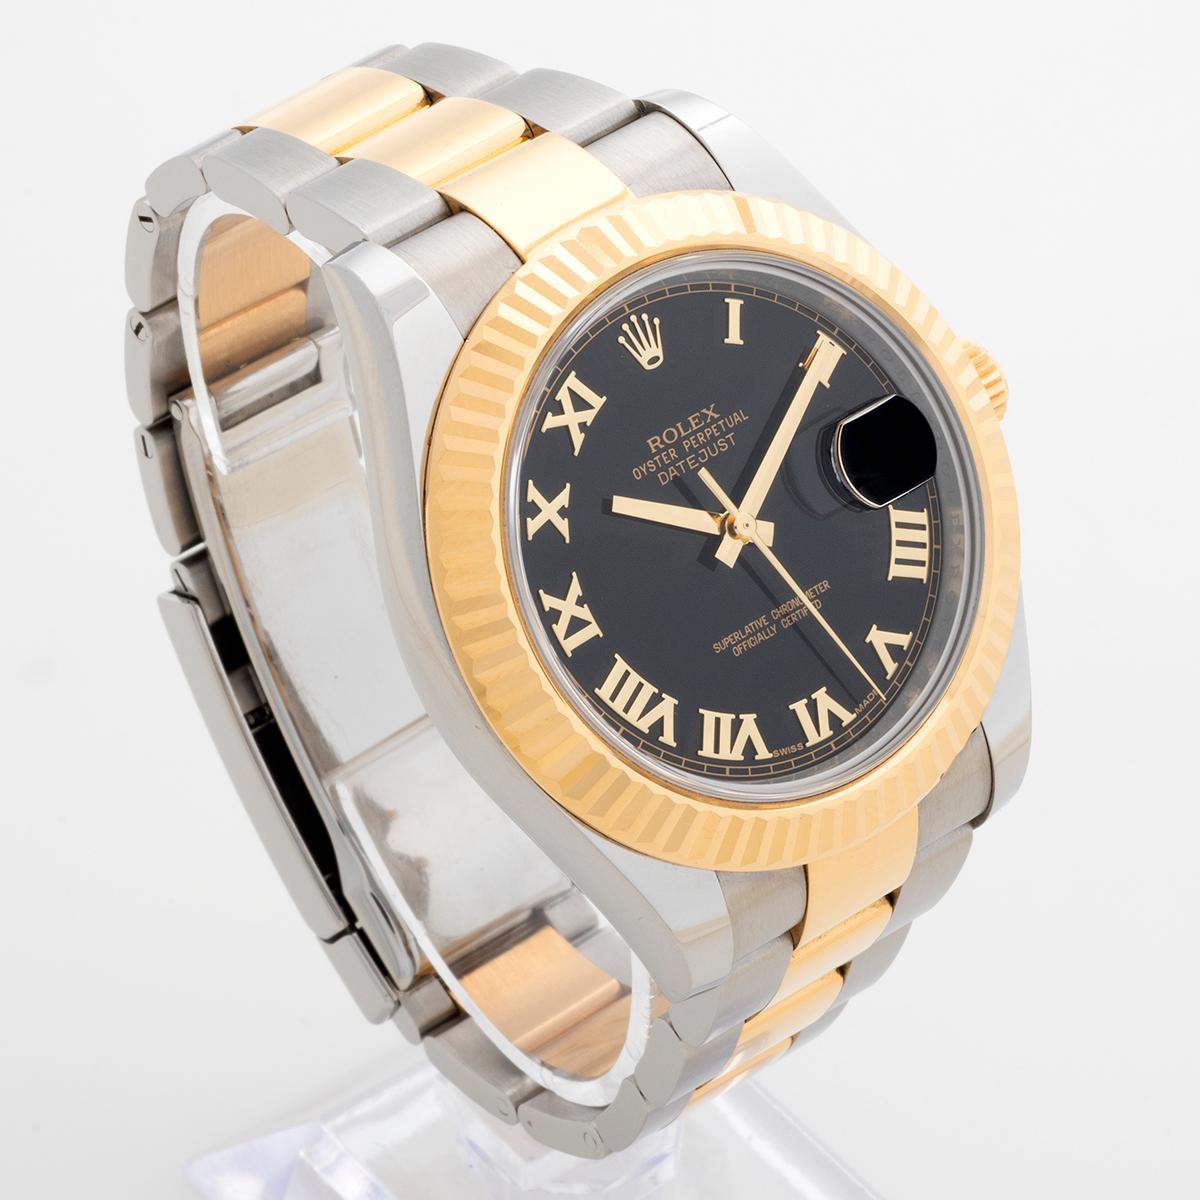 Our Rolex Datejust II / 41 features a rare and desirable black dial with gold Roman Numerals and is discontinued, a part of the original 'wimbledon' range from 2014. Eminently collectible and usable as an everyday statement watch, this reference